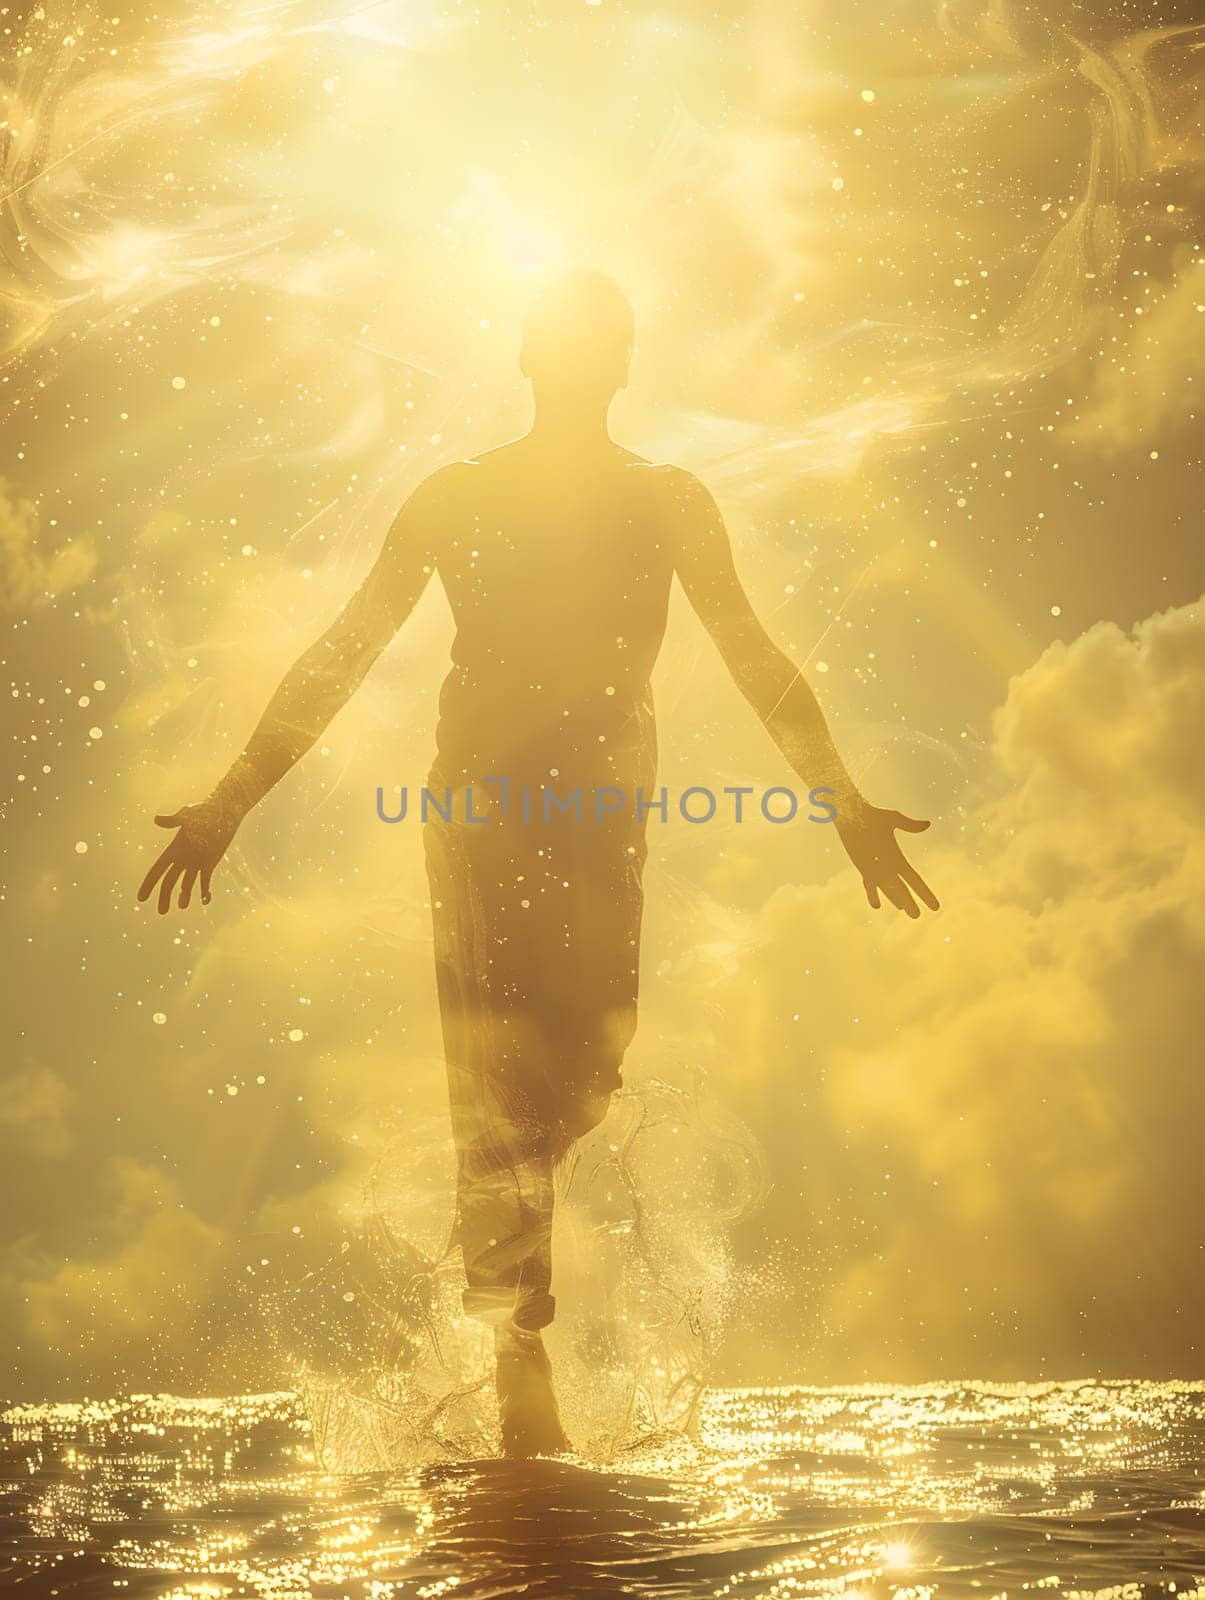 Man joyfully walks in the water, arms outstretched under the warm sunlight by Nadtochiy